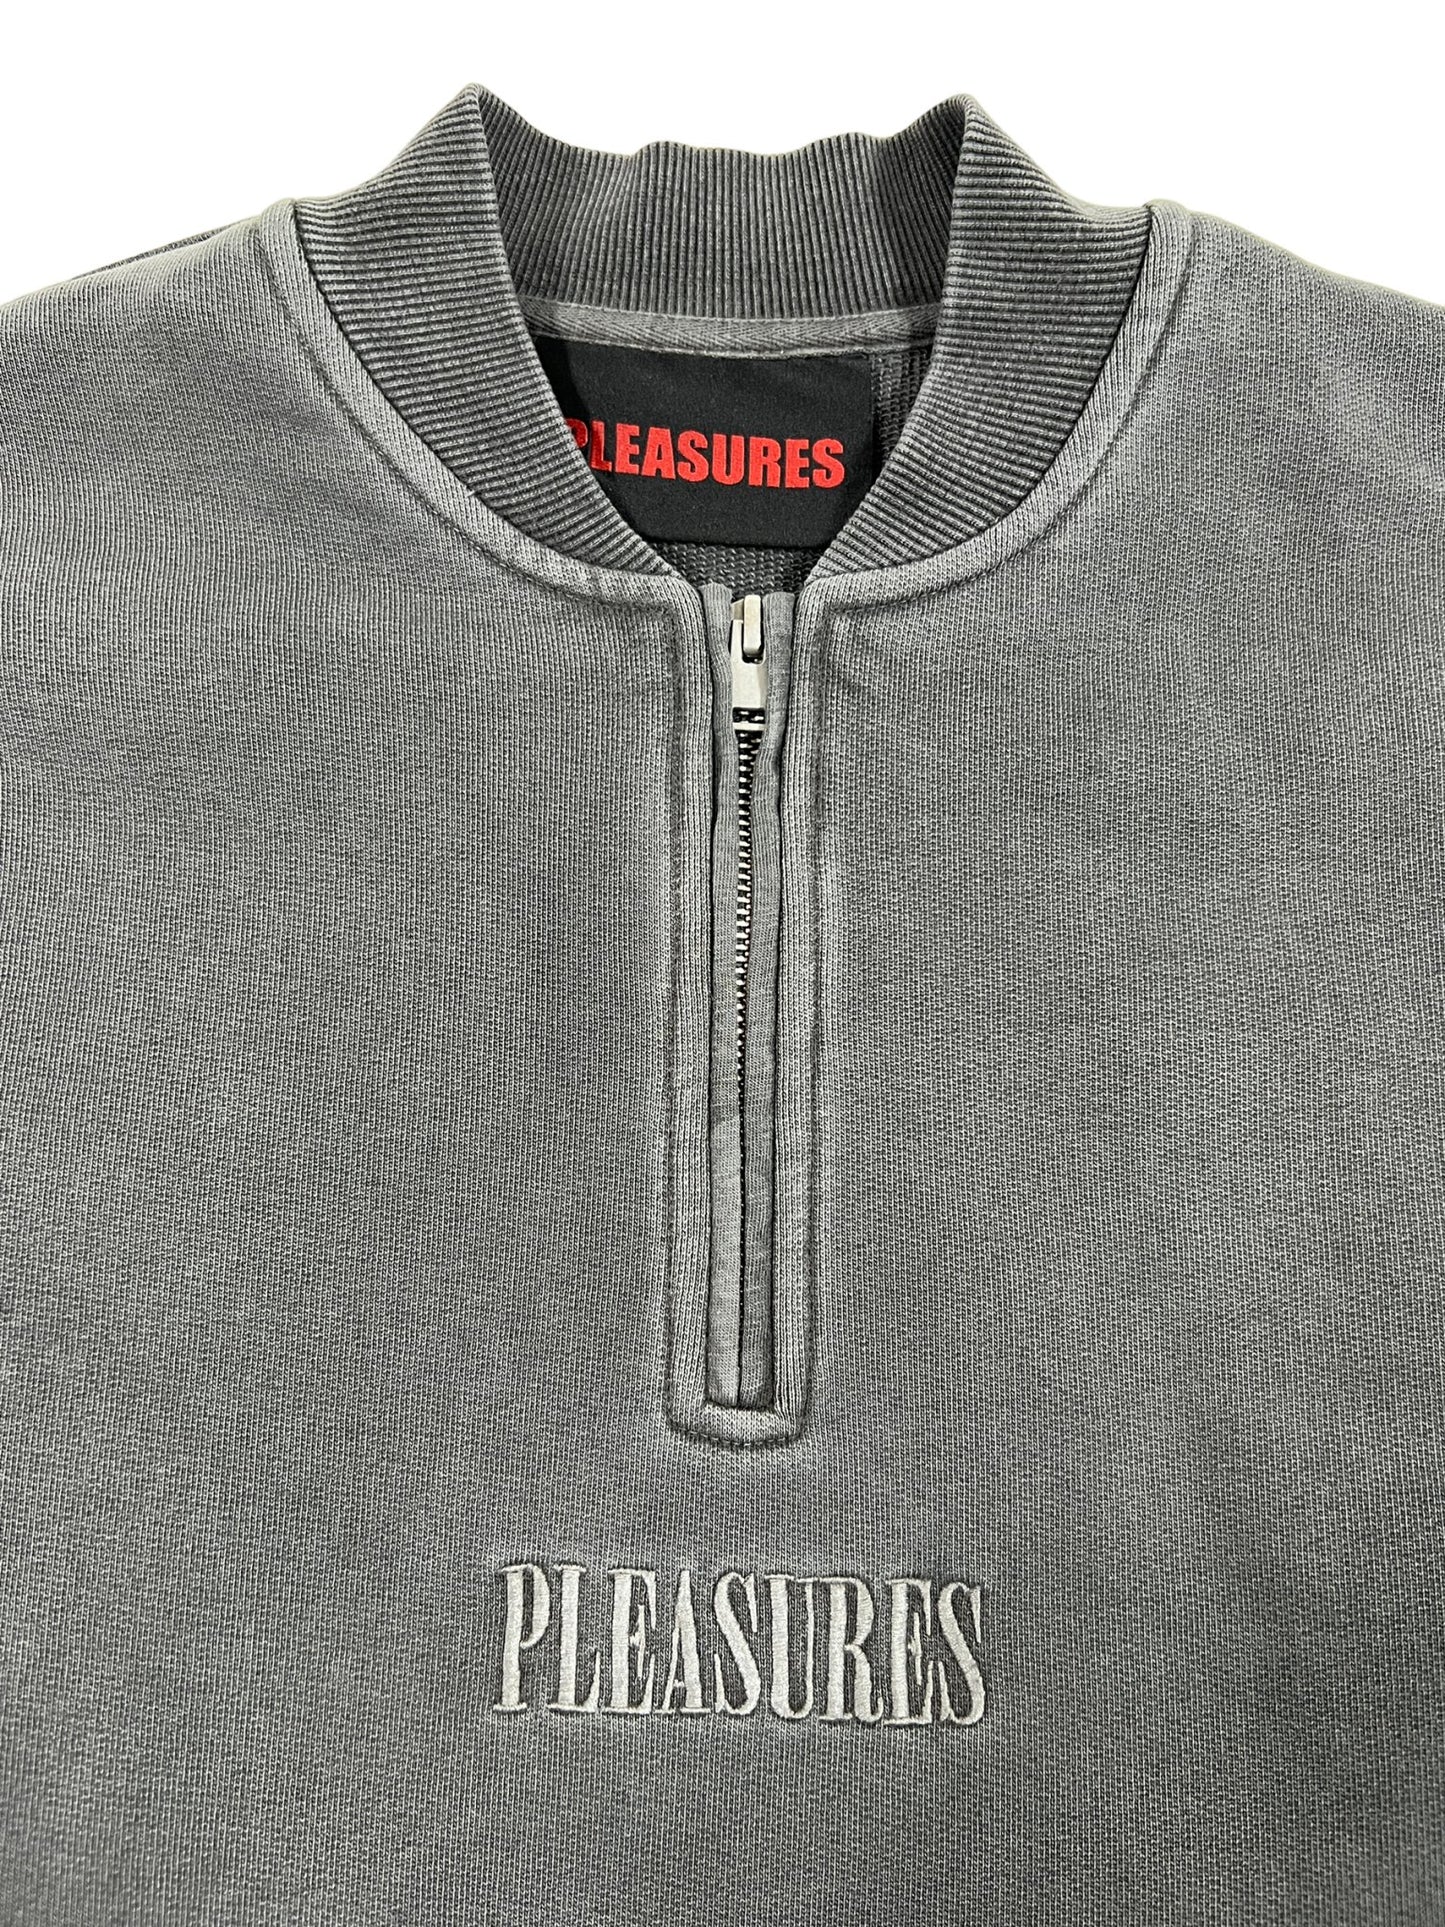 A grey cotton sweatshirt with the embroidered logo "PLEASURES" on it.